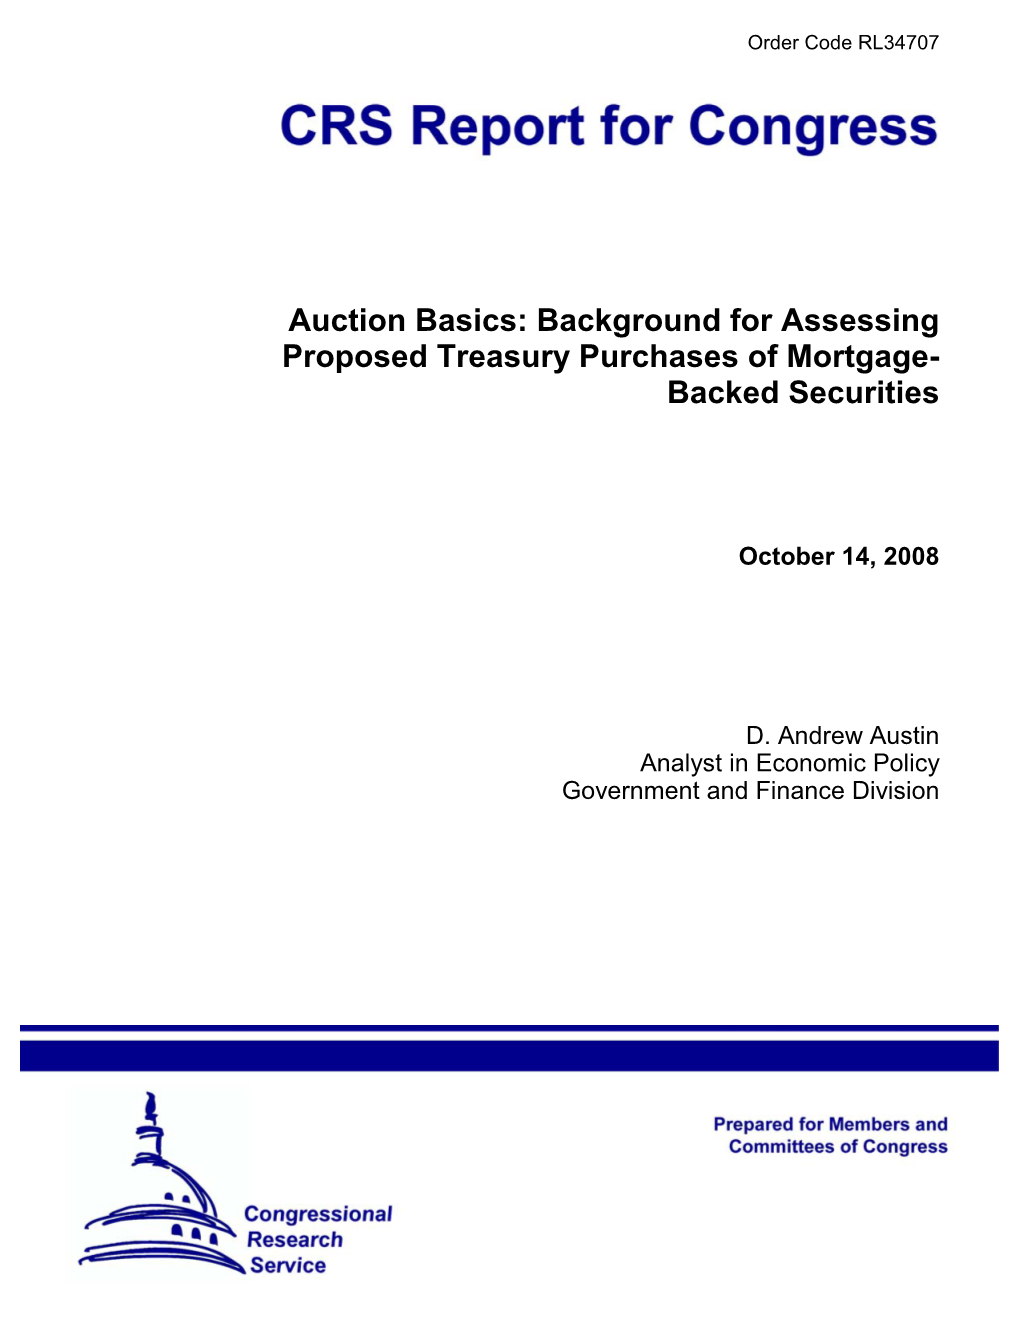 Auction Basics: Background for Assessing Proposed Treasury Purchases of Mortgage-Backed Securities